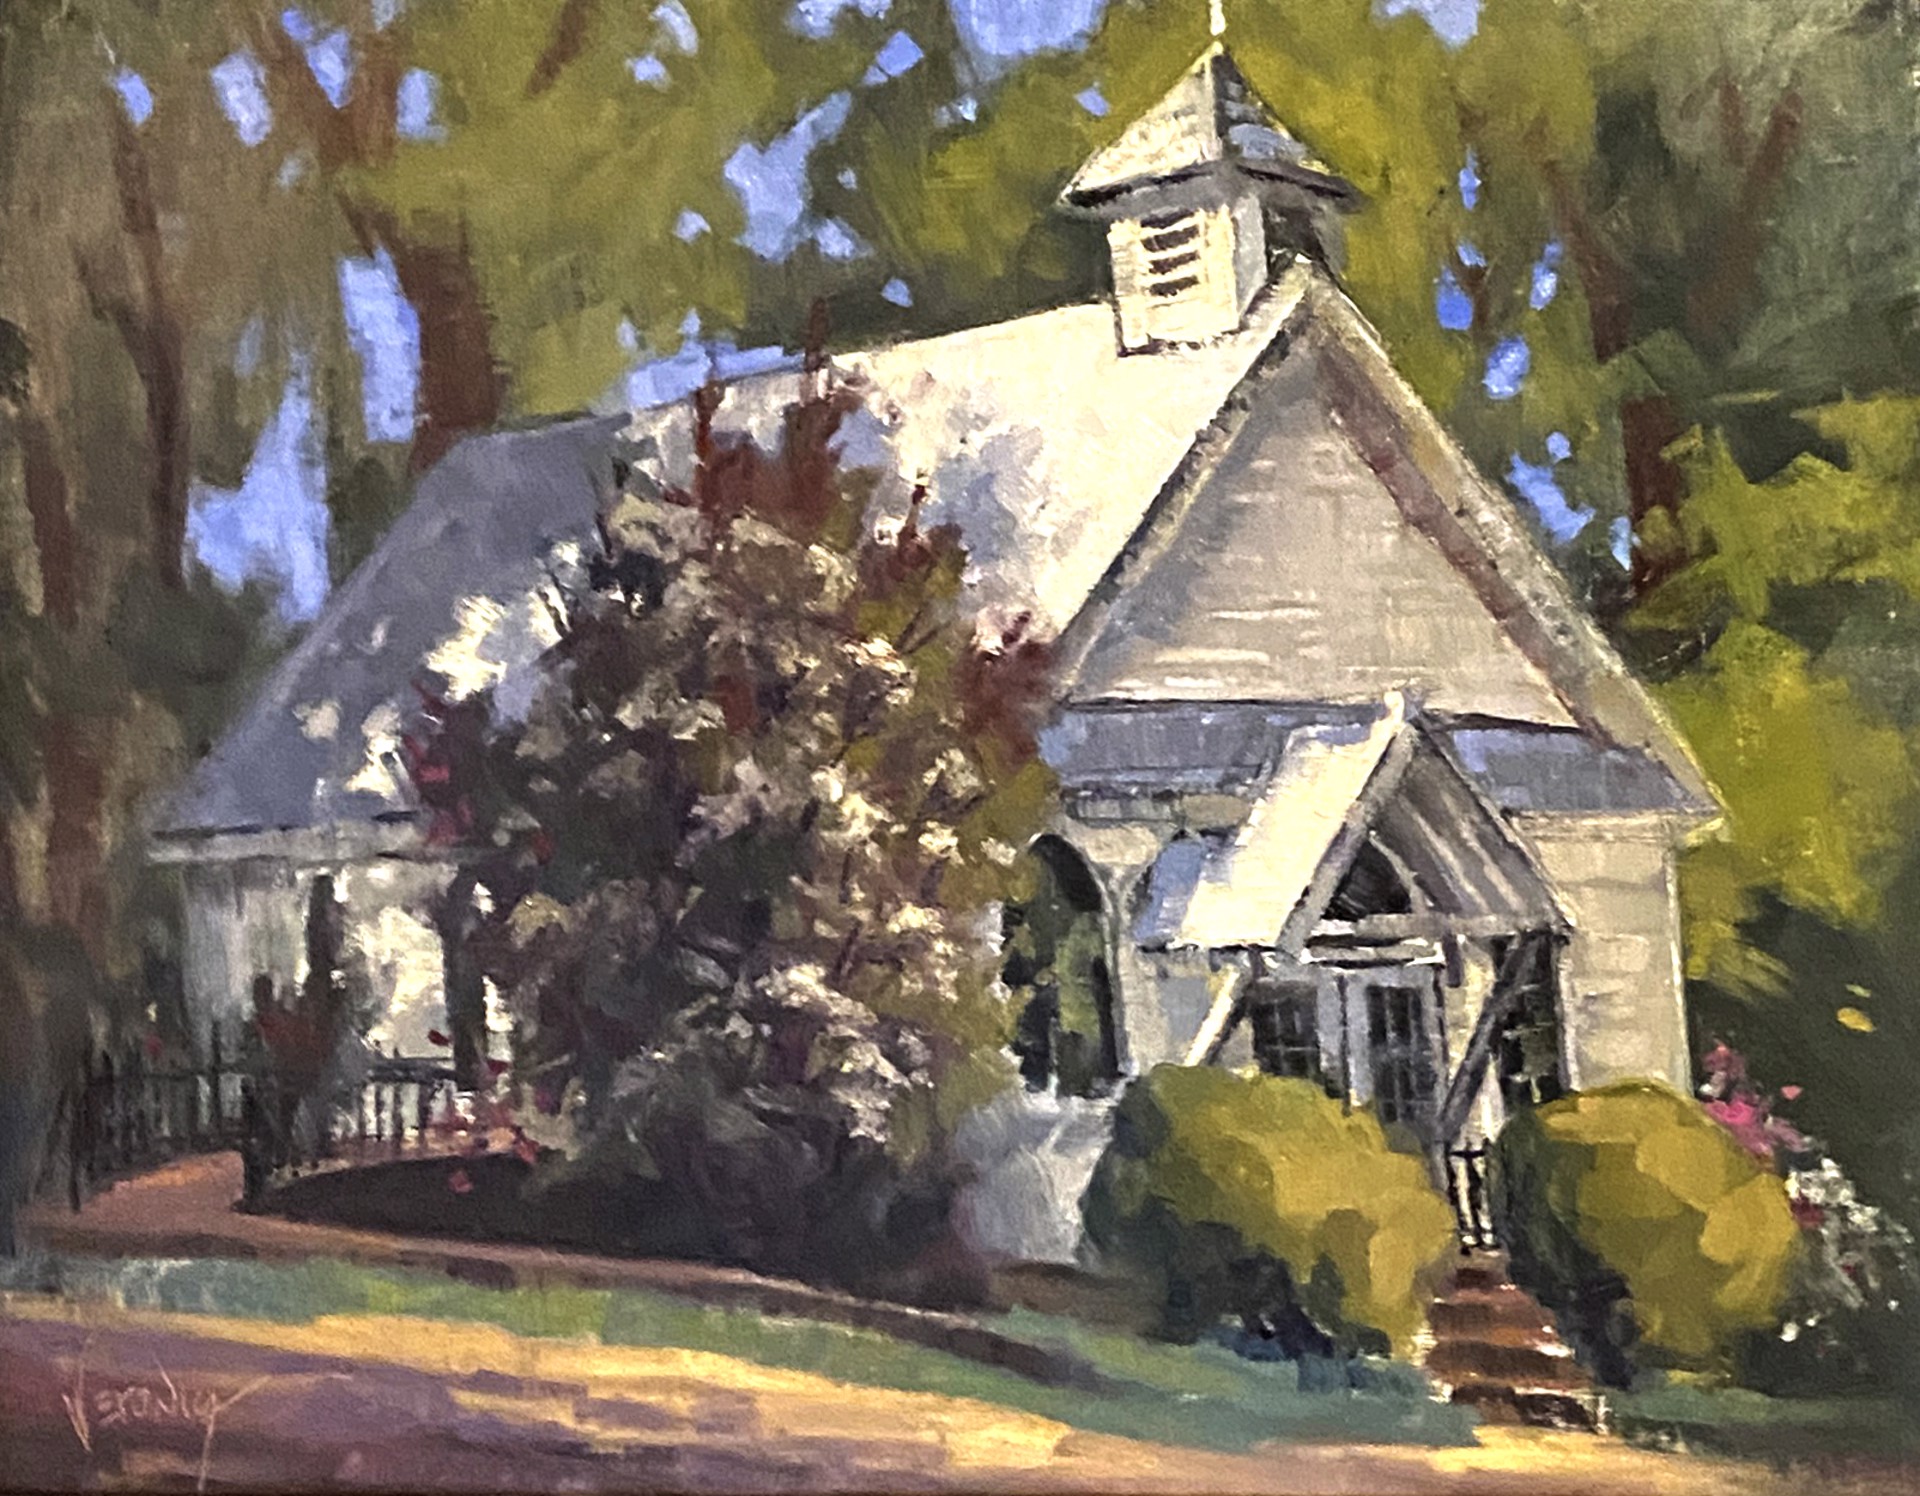 Veronica Brown - "Old Country Church" by NOAPS